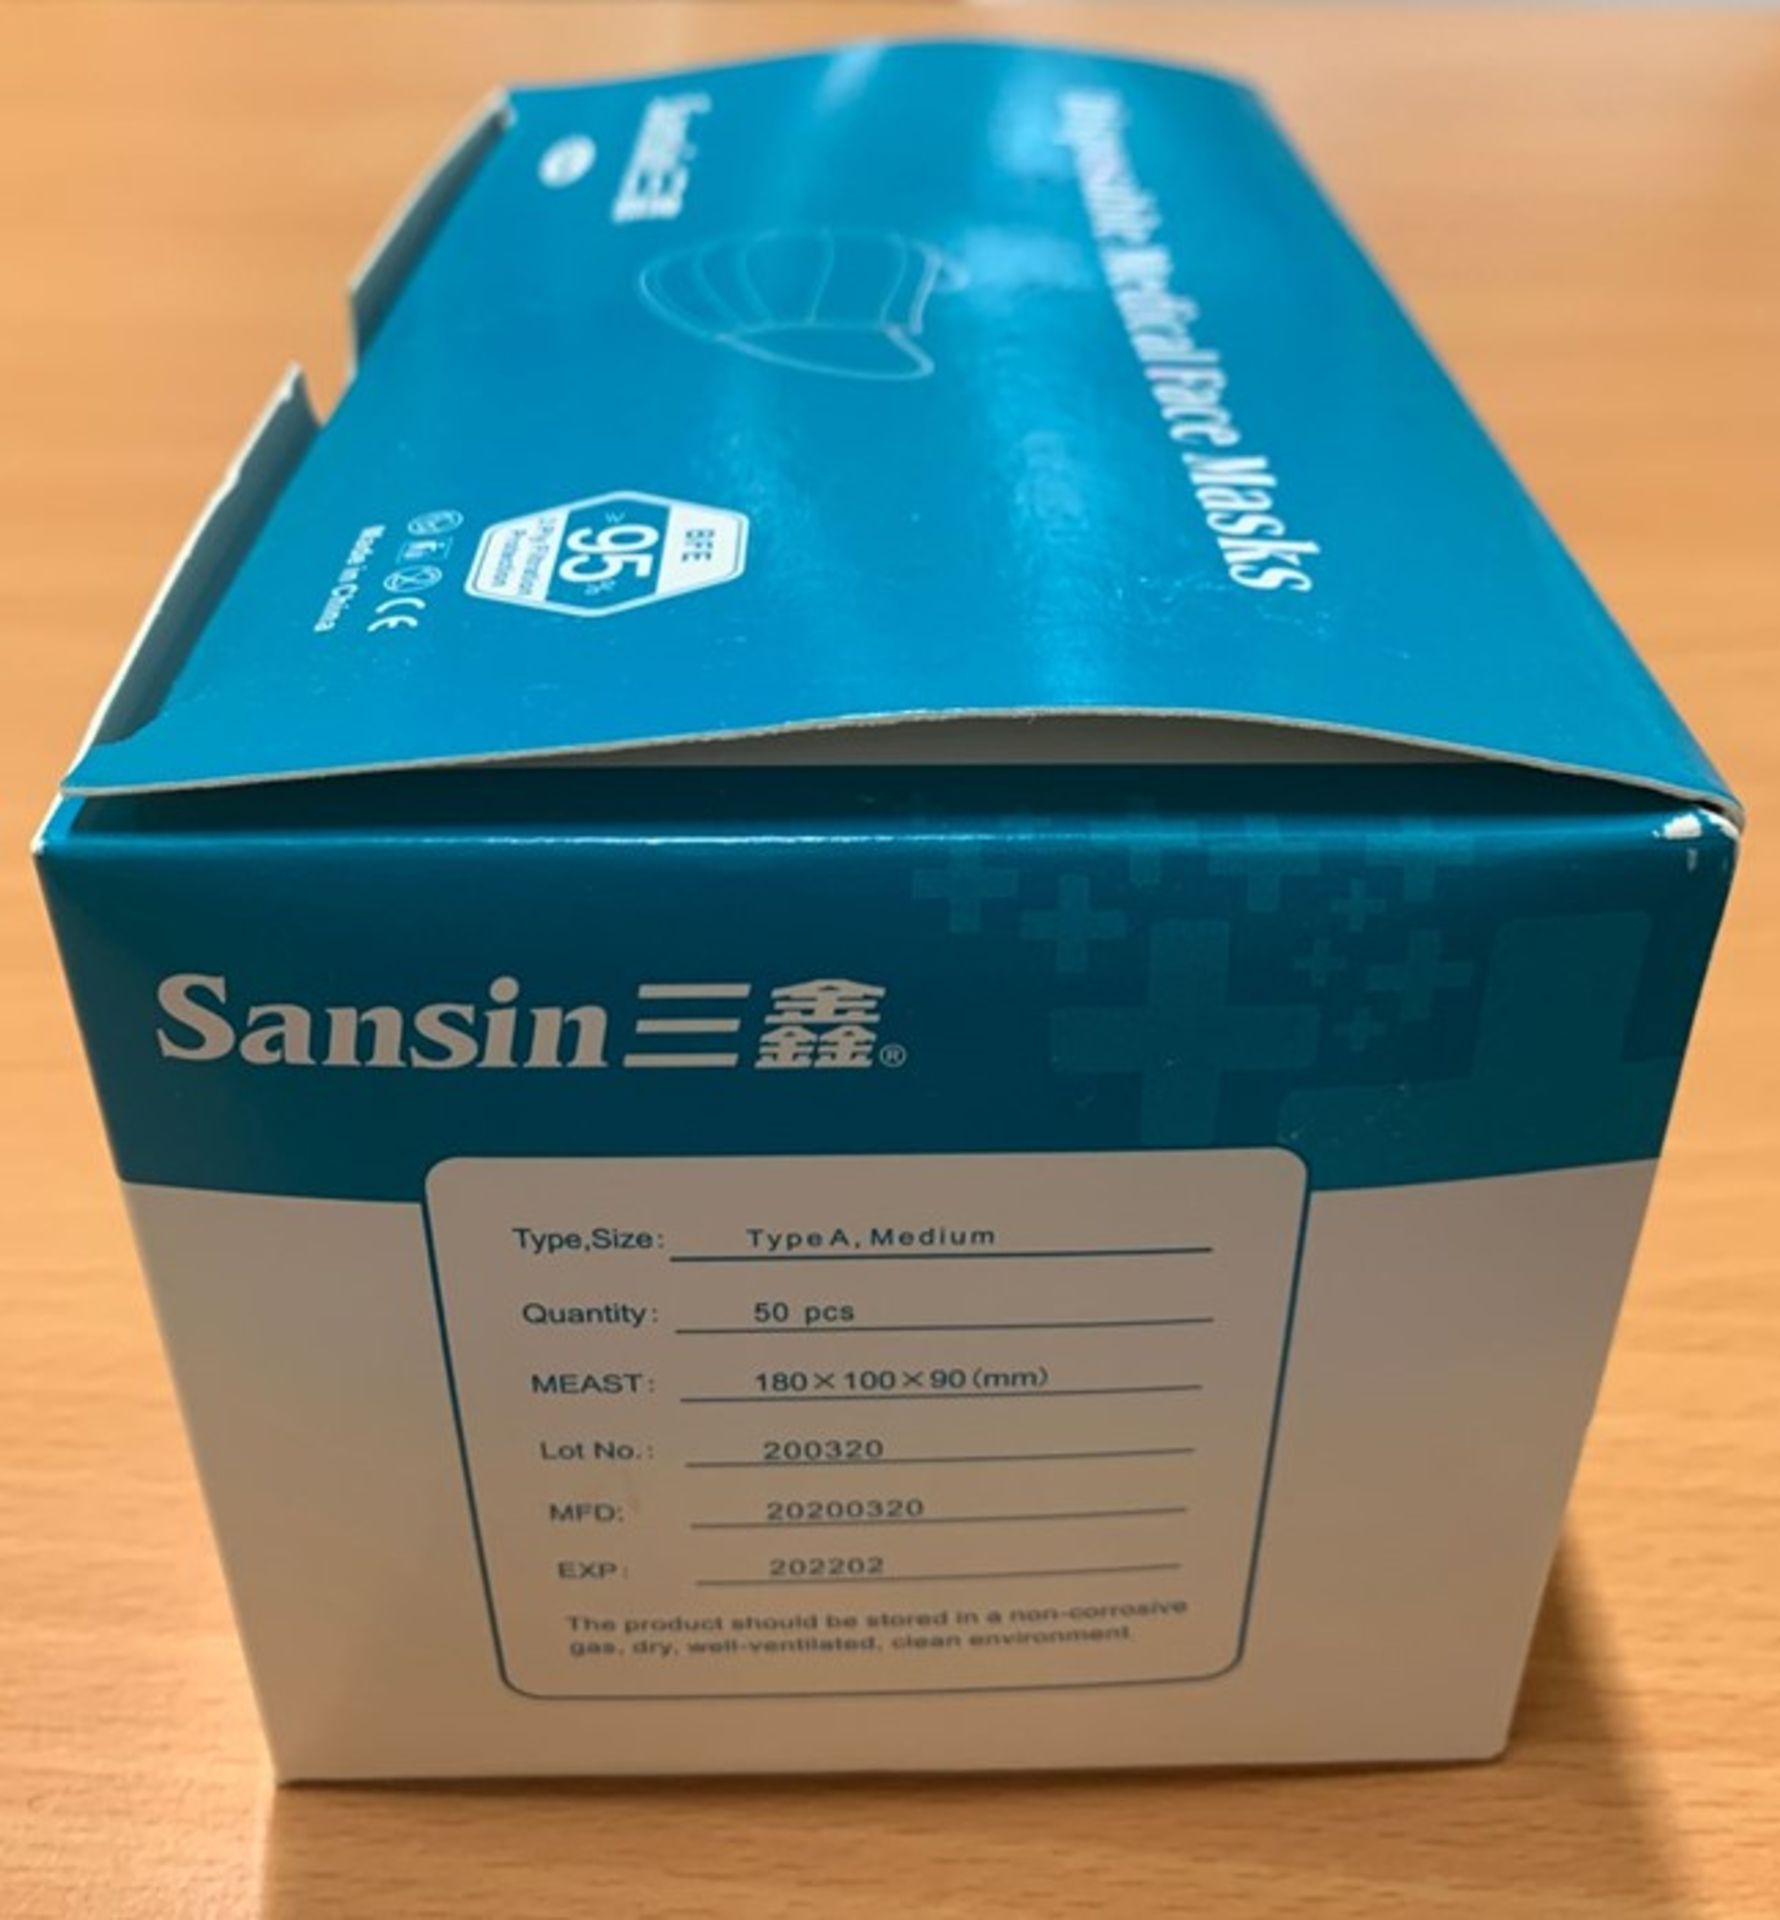 1 BOX OF SANSIN DISPOSABLE MEDICAL FACE MASKS - AS NEW - TYPE A, MEDIUM - 50 PIECES - 180 x 100 x - Image 2 of 2